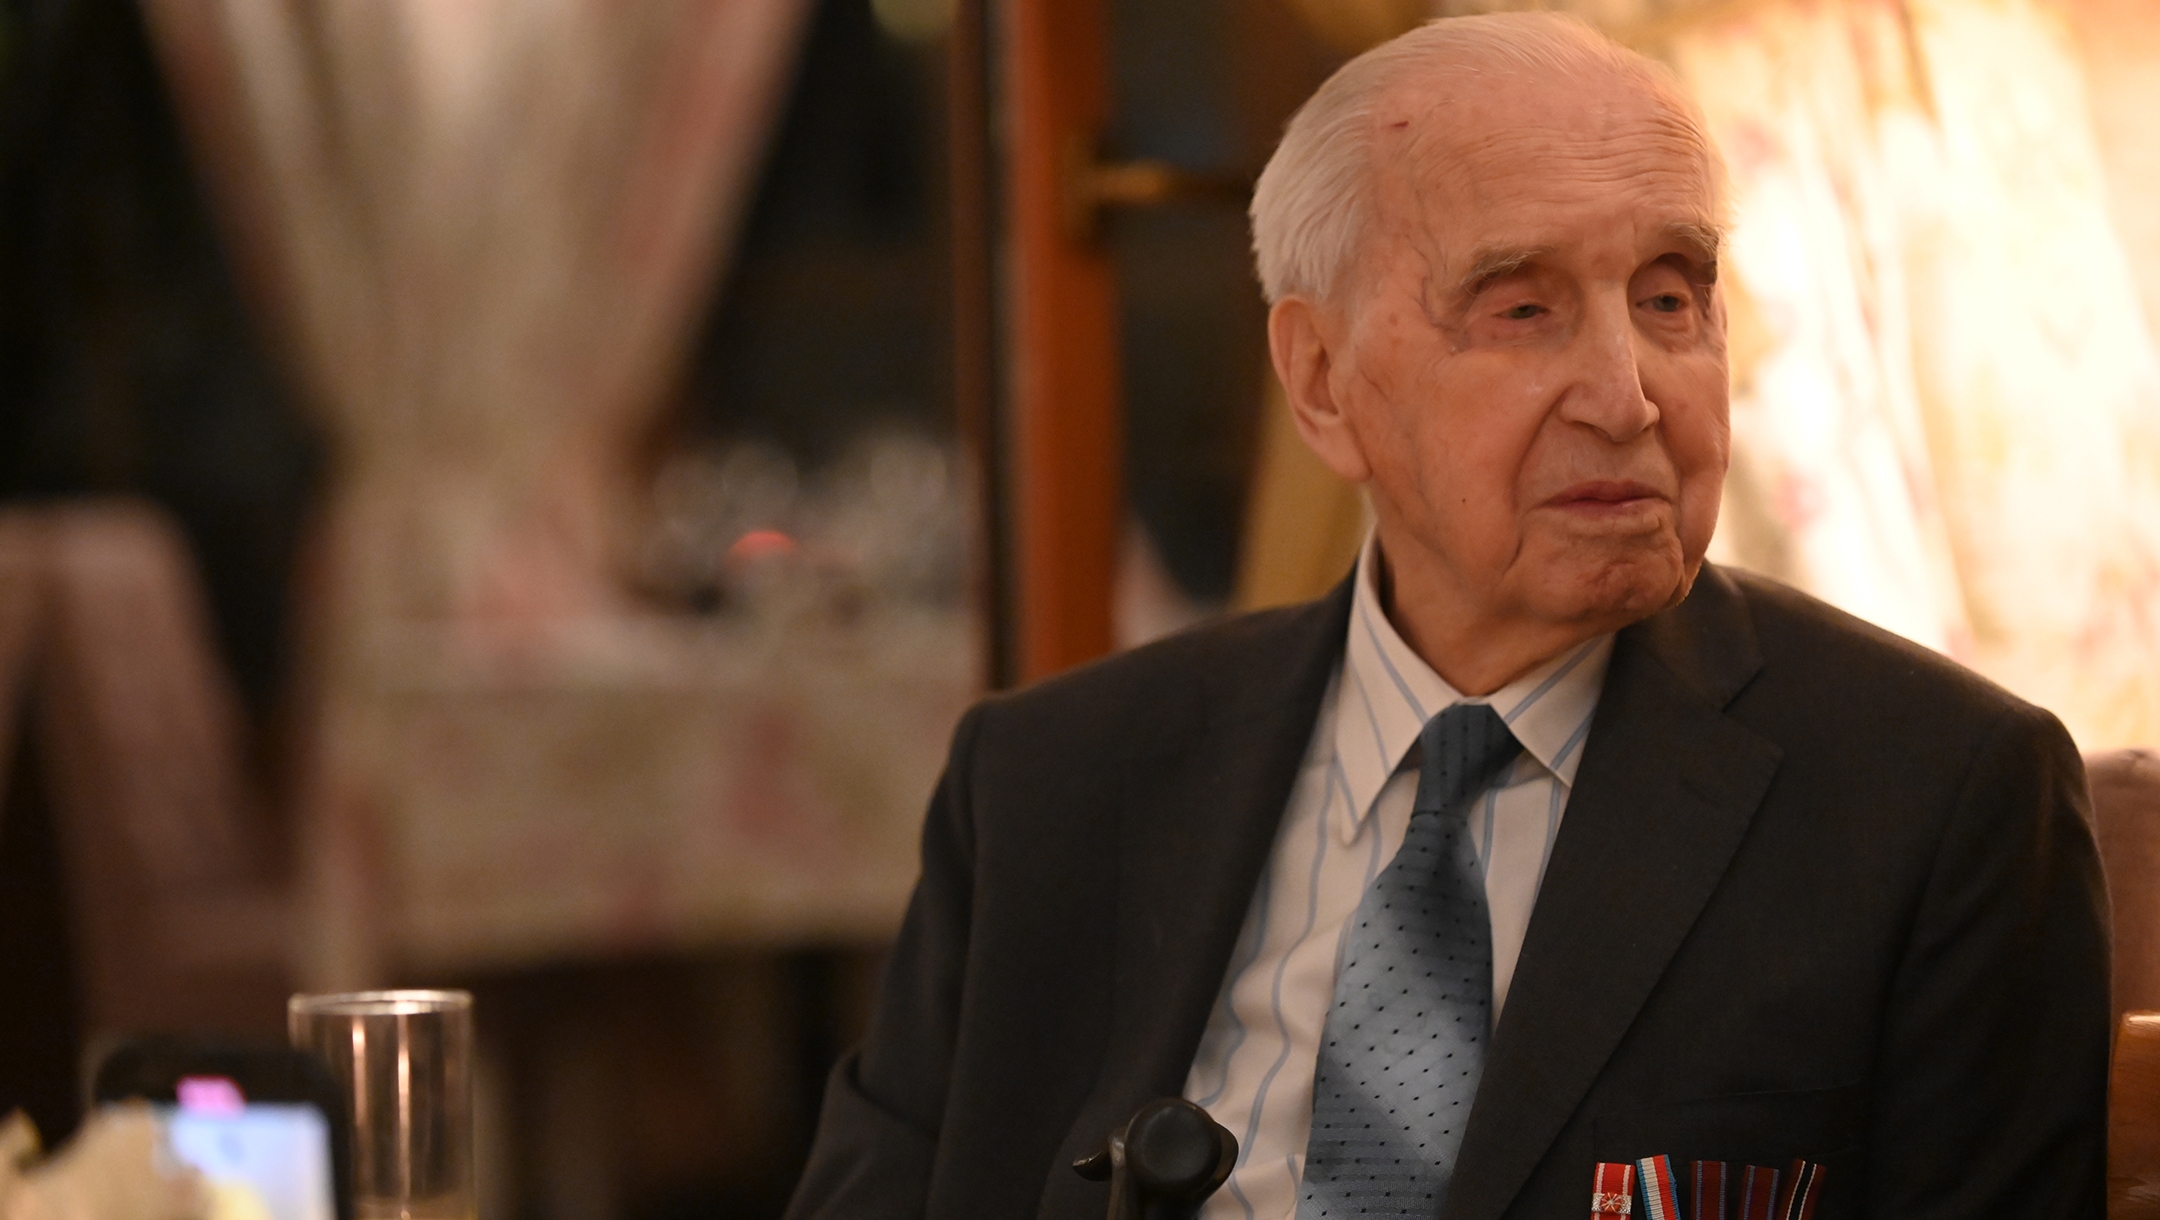 Jozef Walaszczyk, who saved more than 50 Jews during the Holocaust, tells his story at a restaurant in Warsaw, Poland on Jan. 28, 2020. (Cnaan Liphshiz)